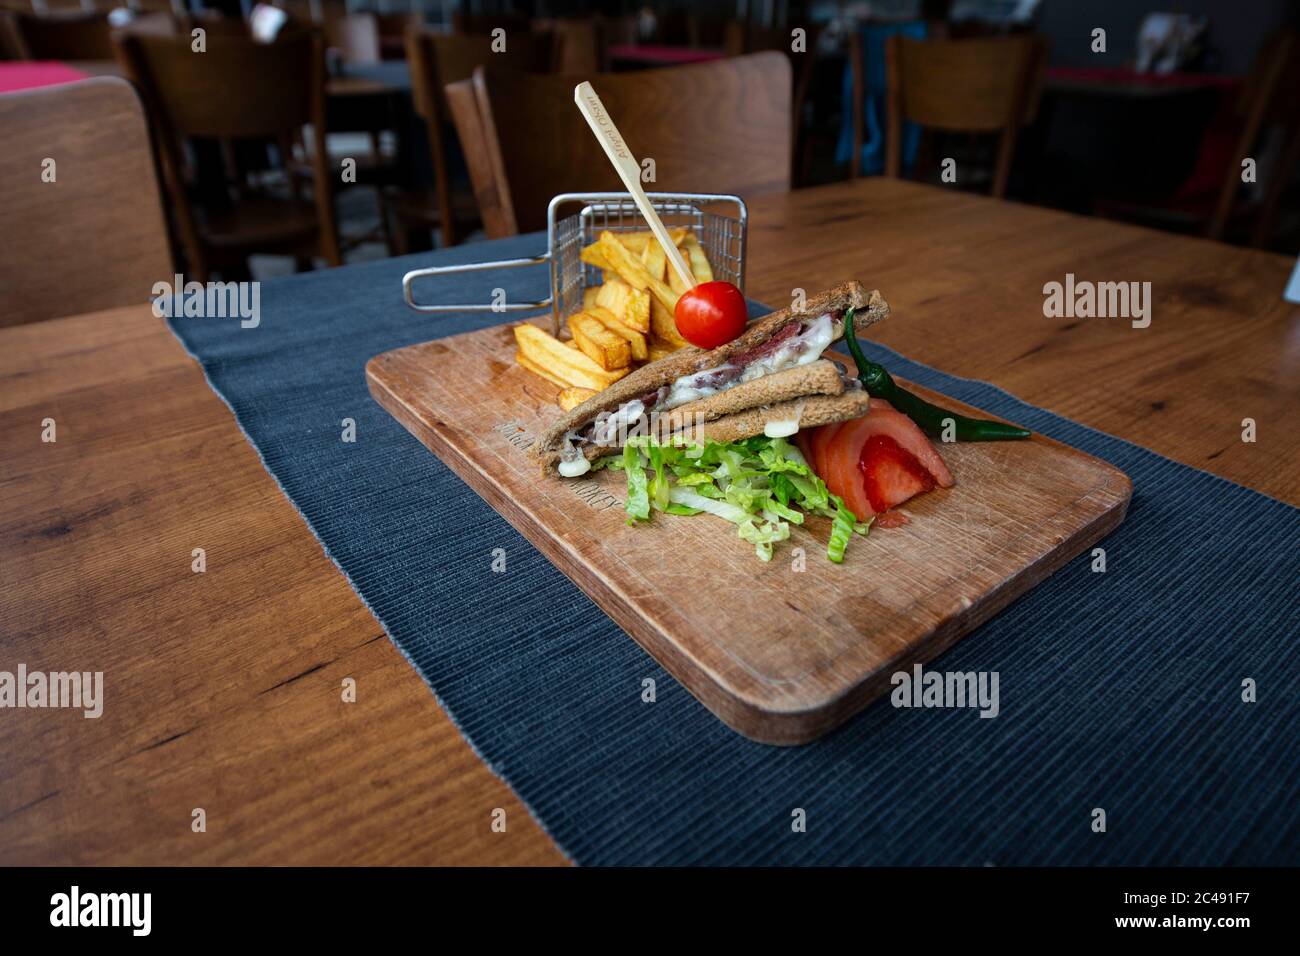 very tasty mixed sandwiches on table.Grilled sandwich Stock Photo - Alamy